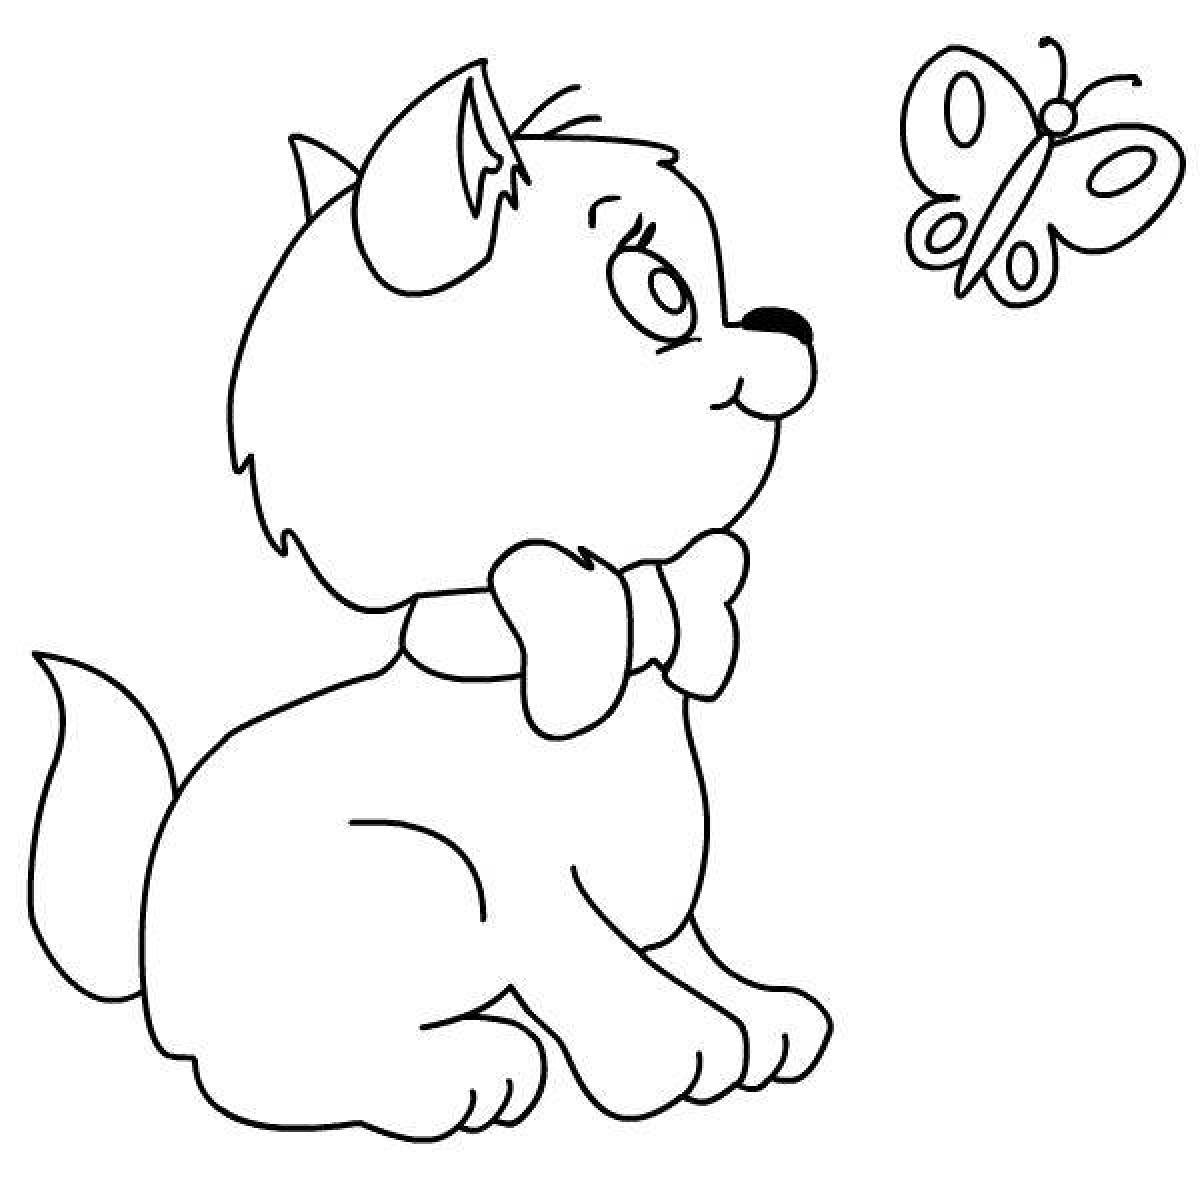 Cute coloring pages with dogs and cats for kids